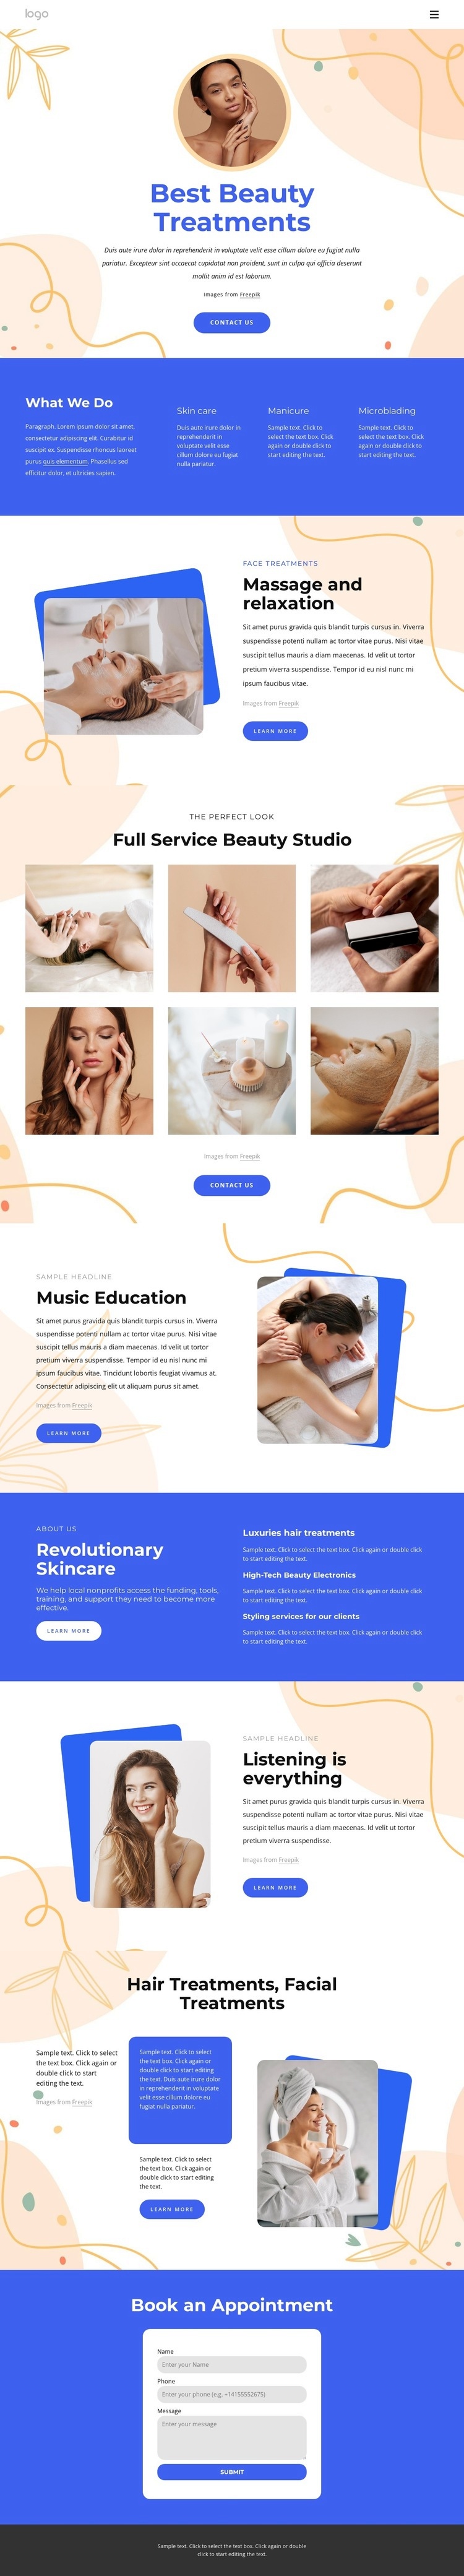 Our beauty treatments Wix Template Alternative